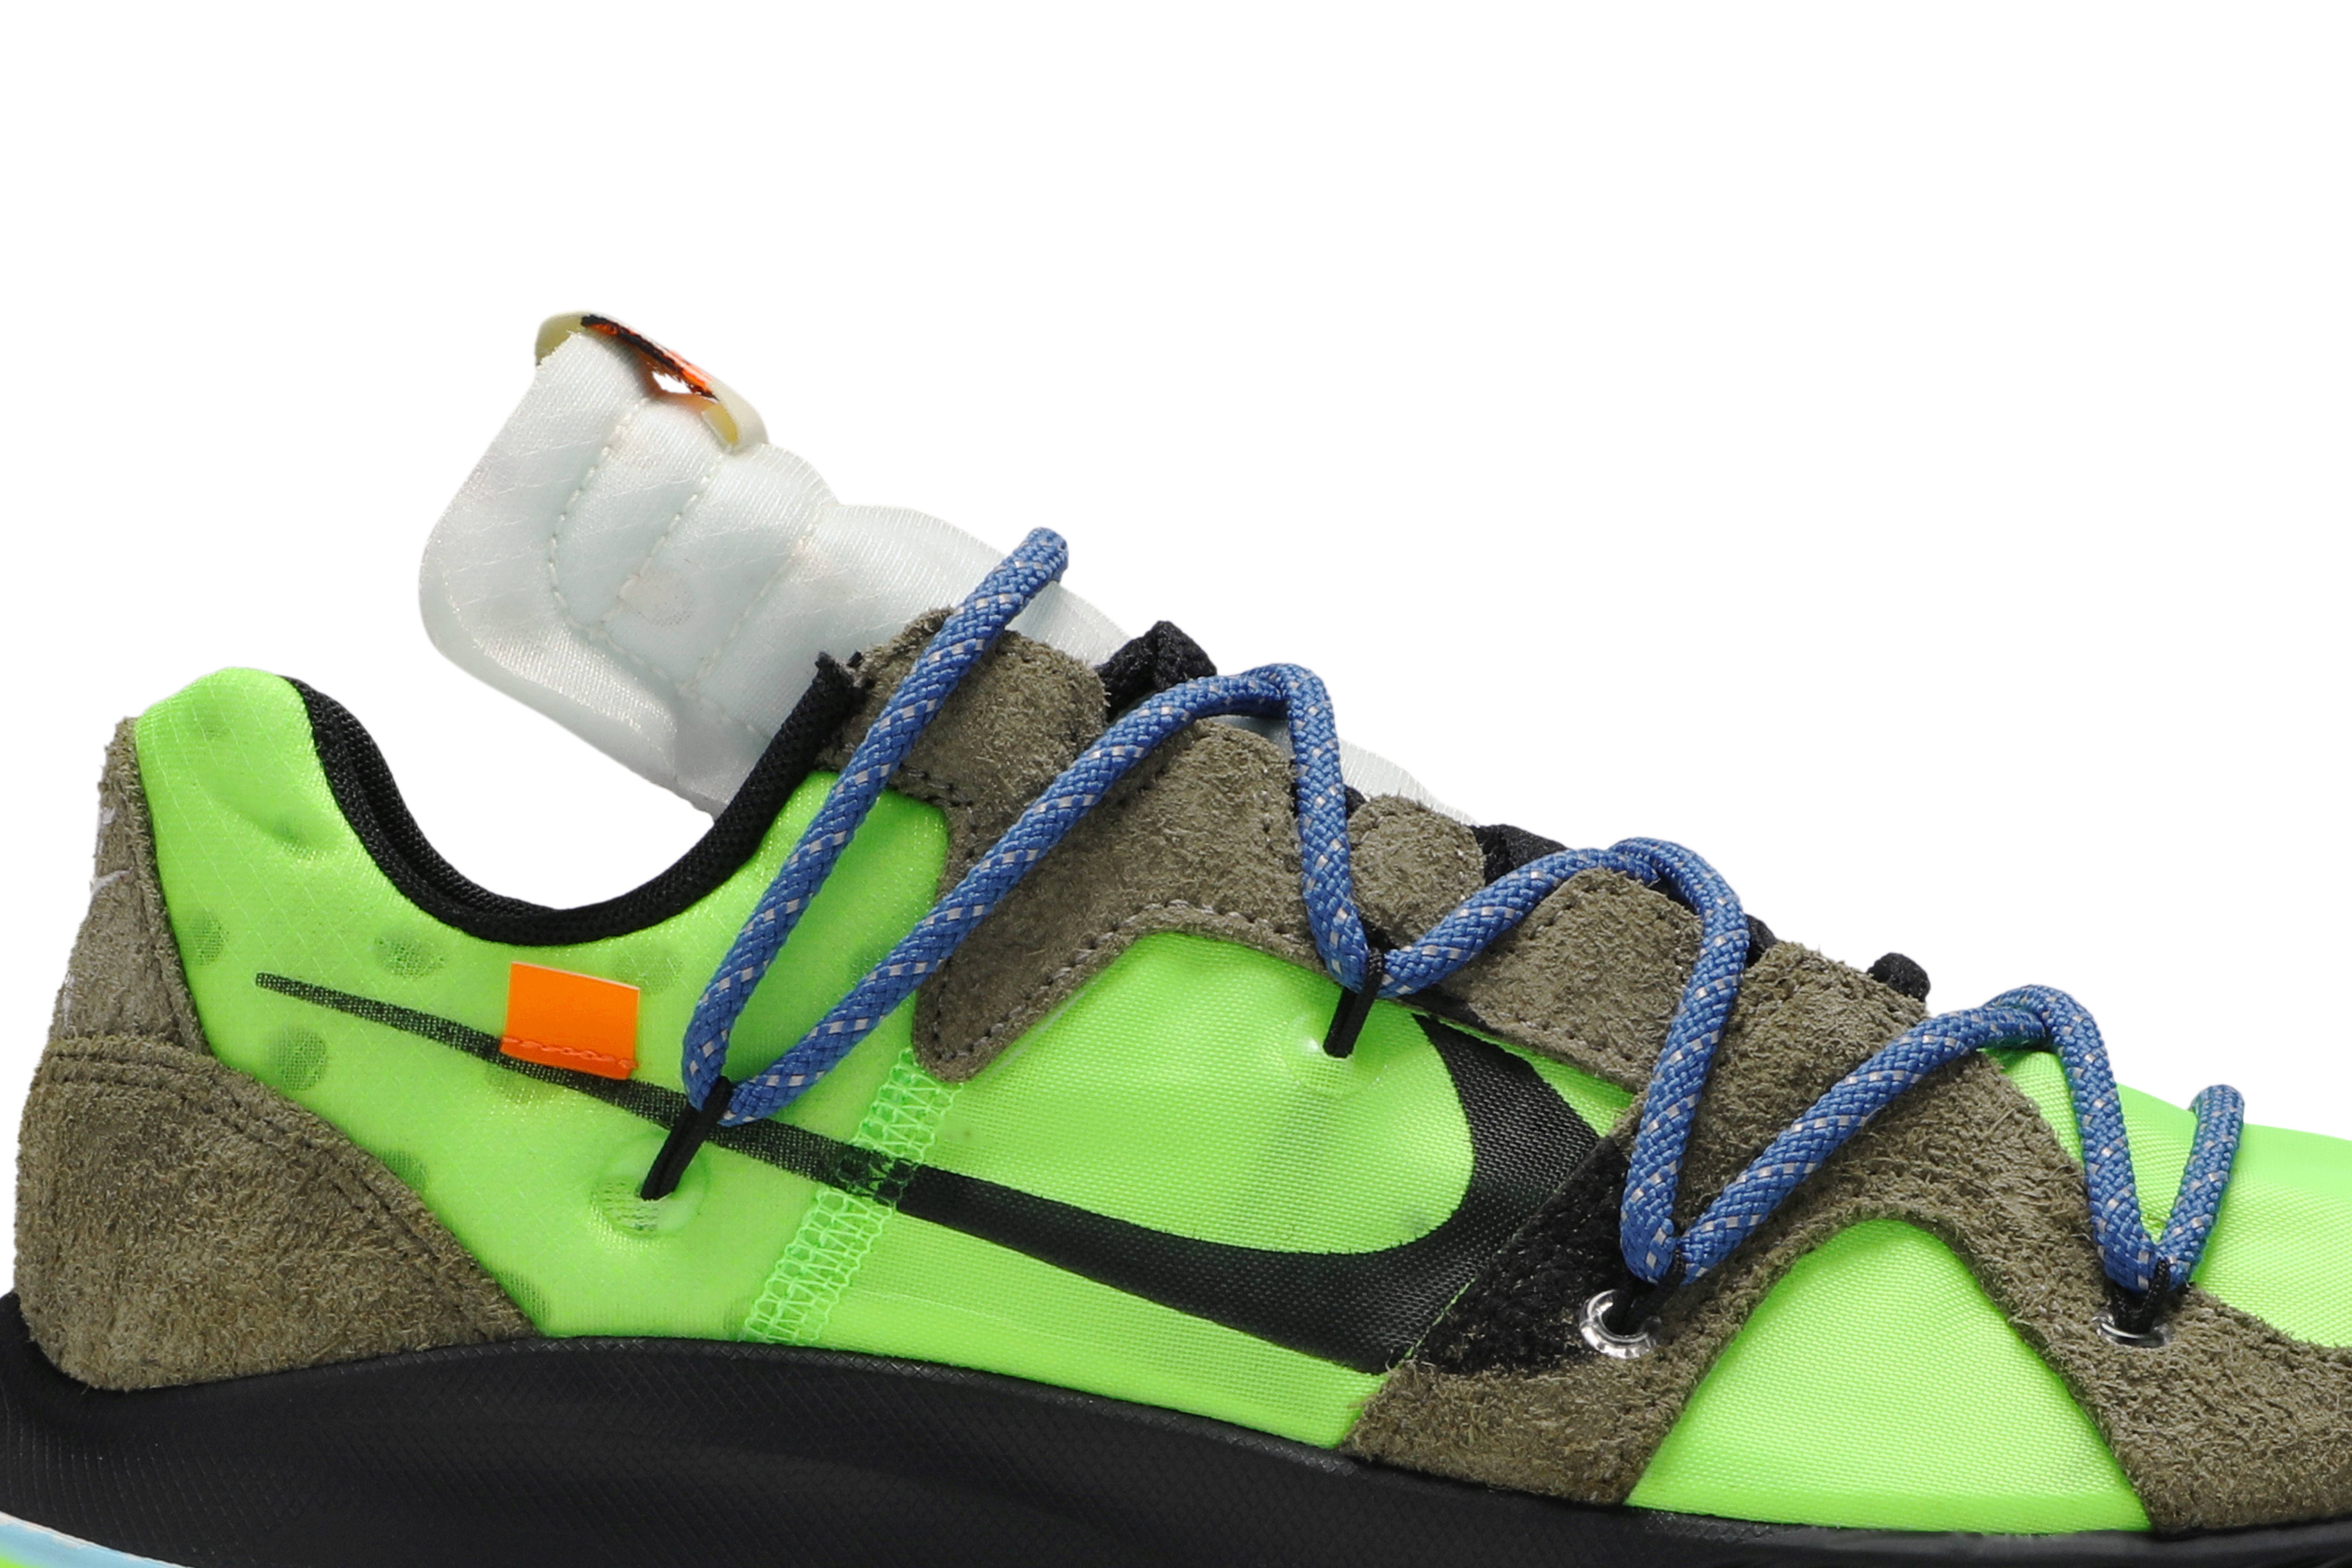 Off-White x Wmns Air Zoom Terra Kiger 5 'Athlete in Progress - Electric Green' - 2